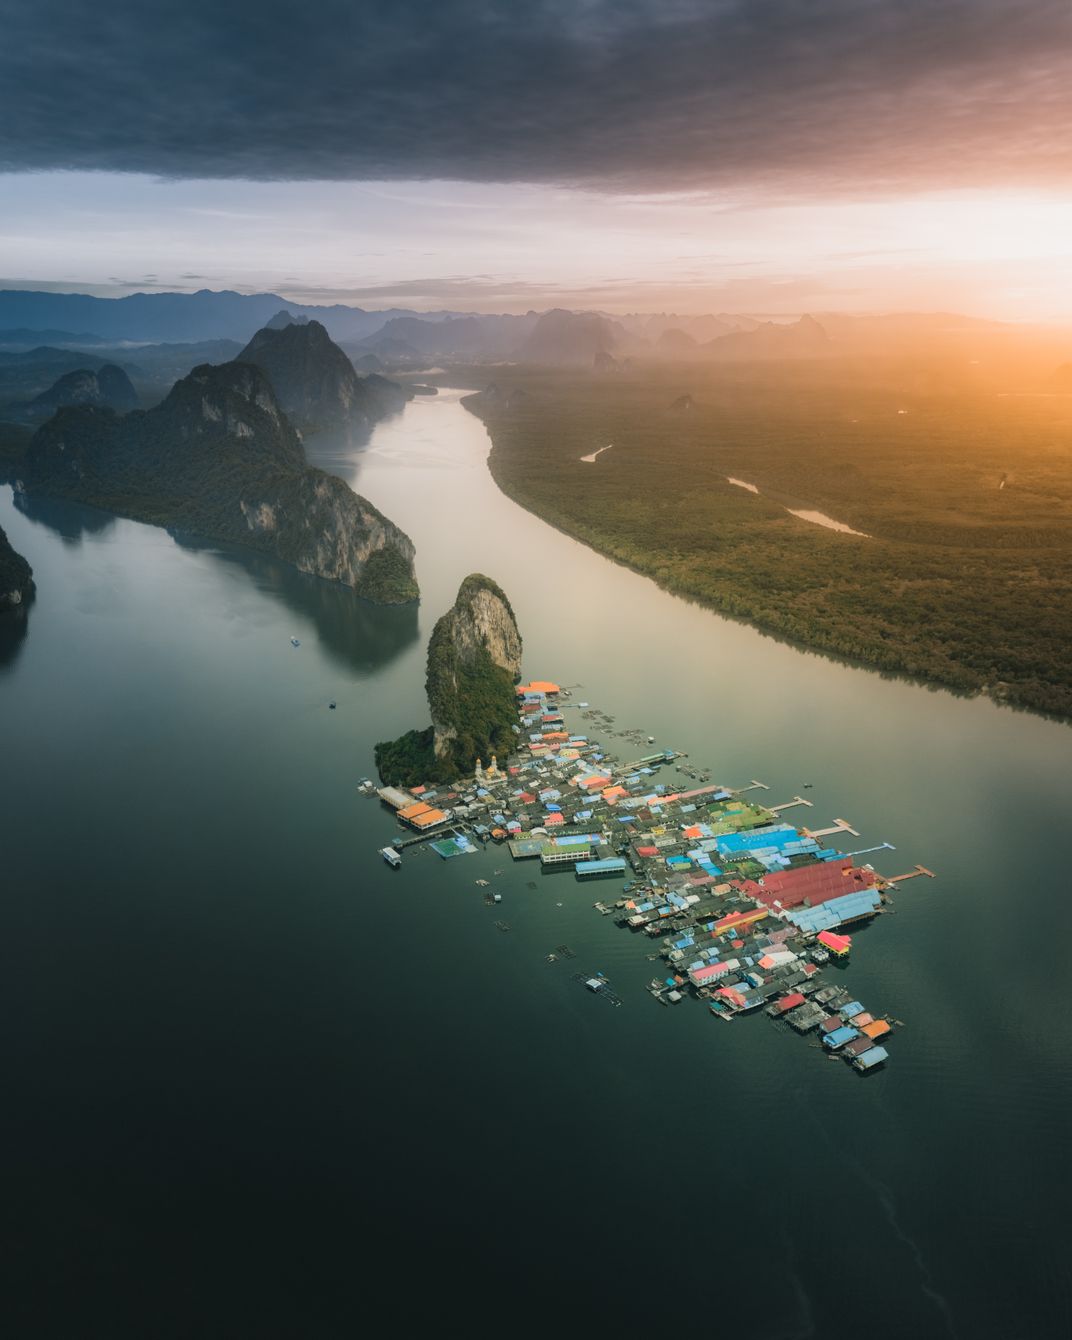 6 - The sun rises over a floating village on Panyee Island in Thailand’s Phang Nga Bay.